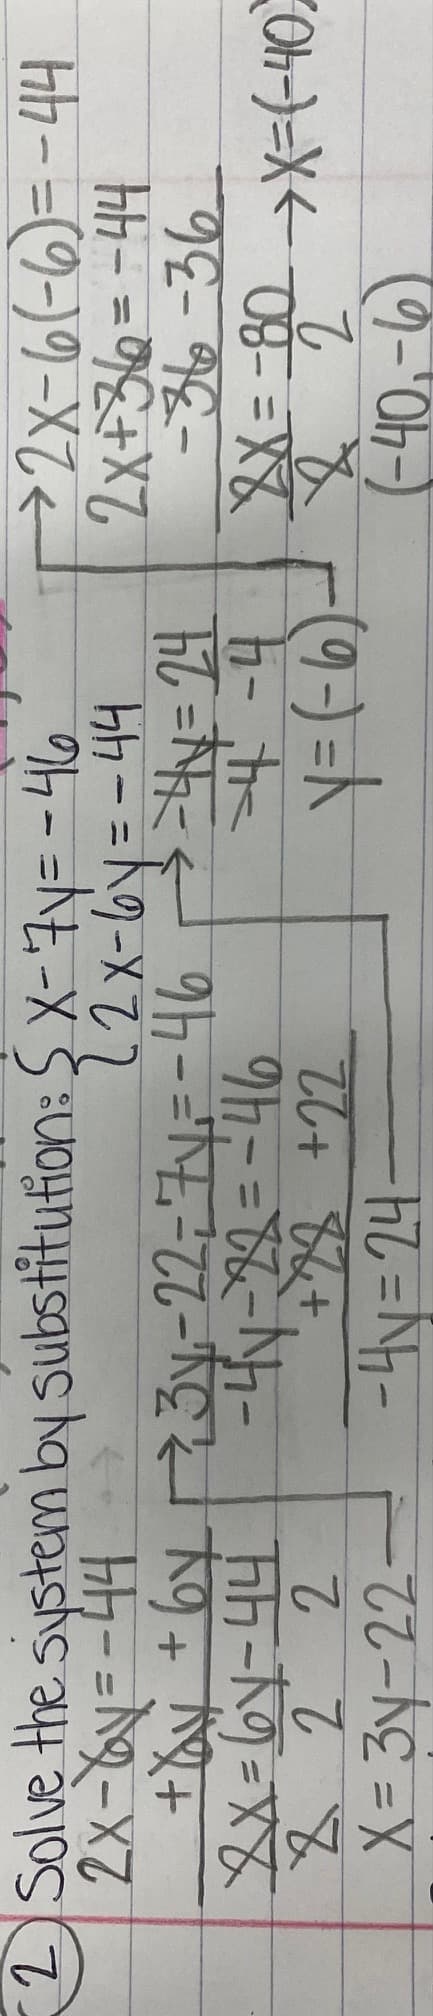 2 Solve the system
2x-by=-44
SX-7 y = - 46
22x-6y=-44
+y + by 3y₁-22= 74= -46 - 4x = 24
by substitution:
hh-19=xx
9h²=82-1₂-
Z + 8 +
h2=17₁₂-
2 2 2
=22-K₂=X
hh-=(9-)9-X2<
ht==9+X7
-92-98-
t₁- ti
08-=XX
(OH- )= X < = [(9-) = k
2 x
(9-Oh-